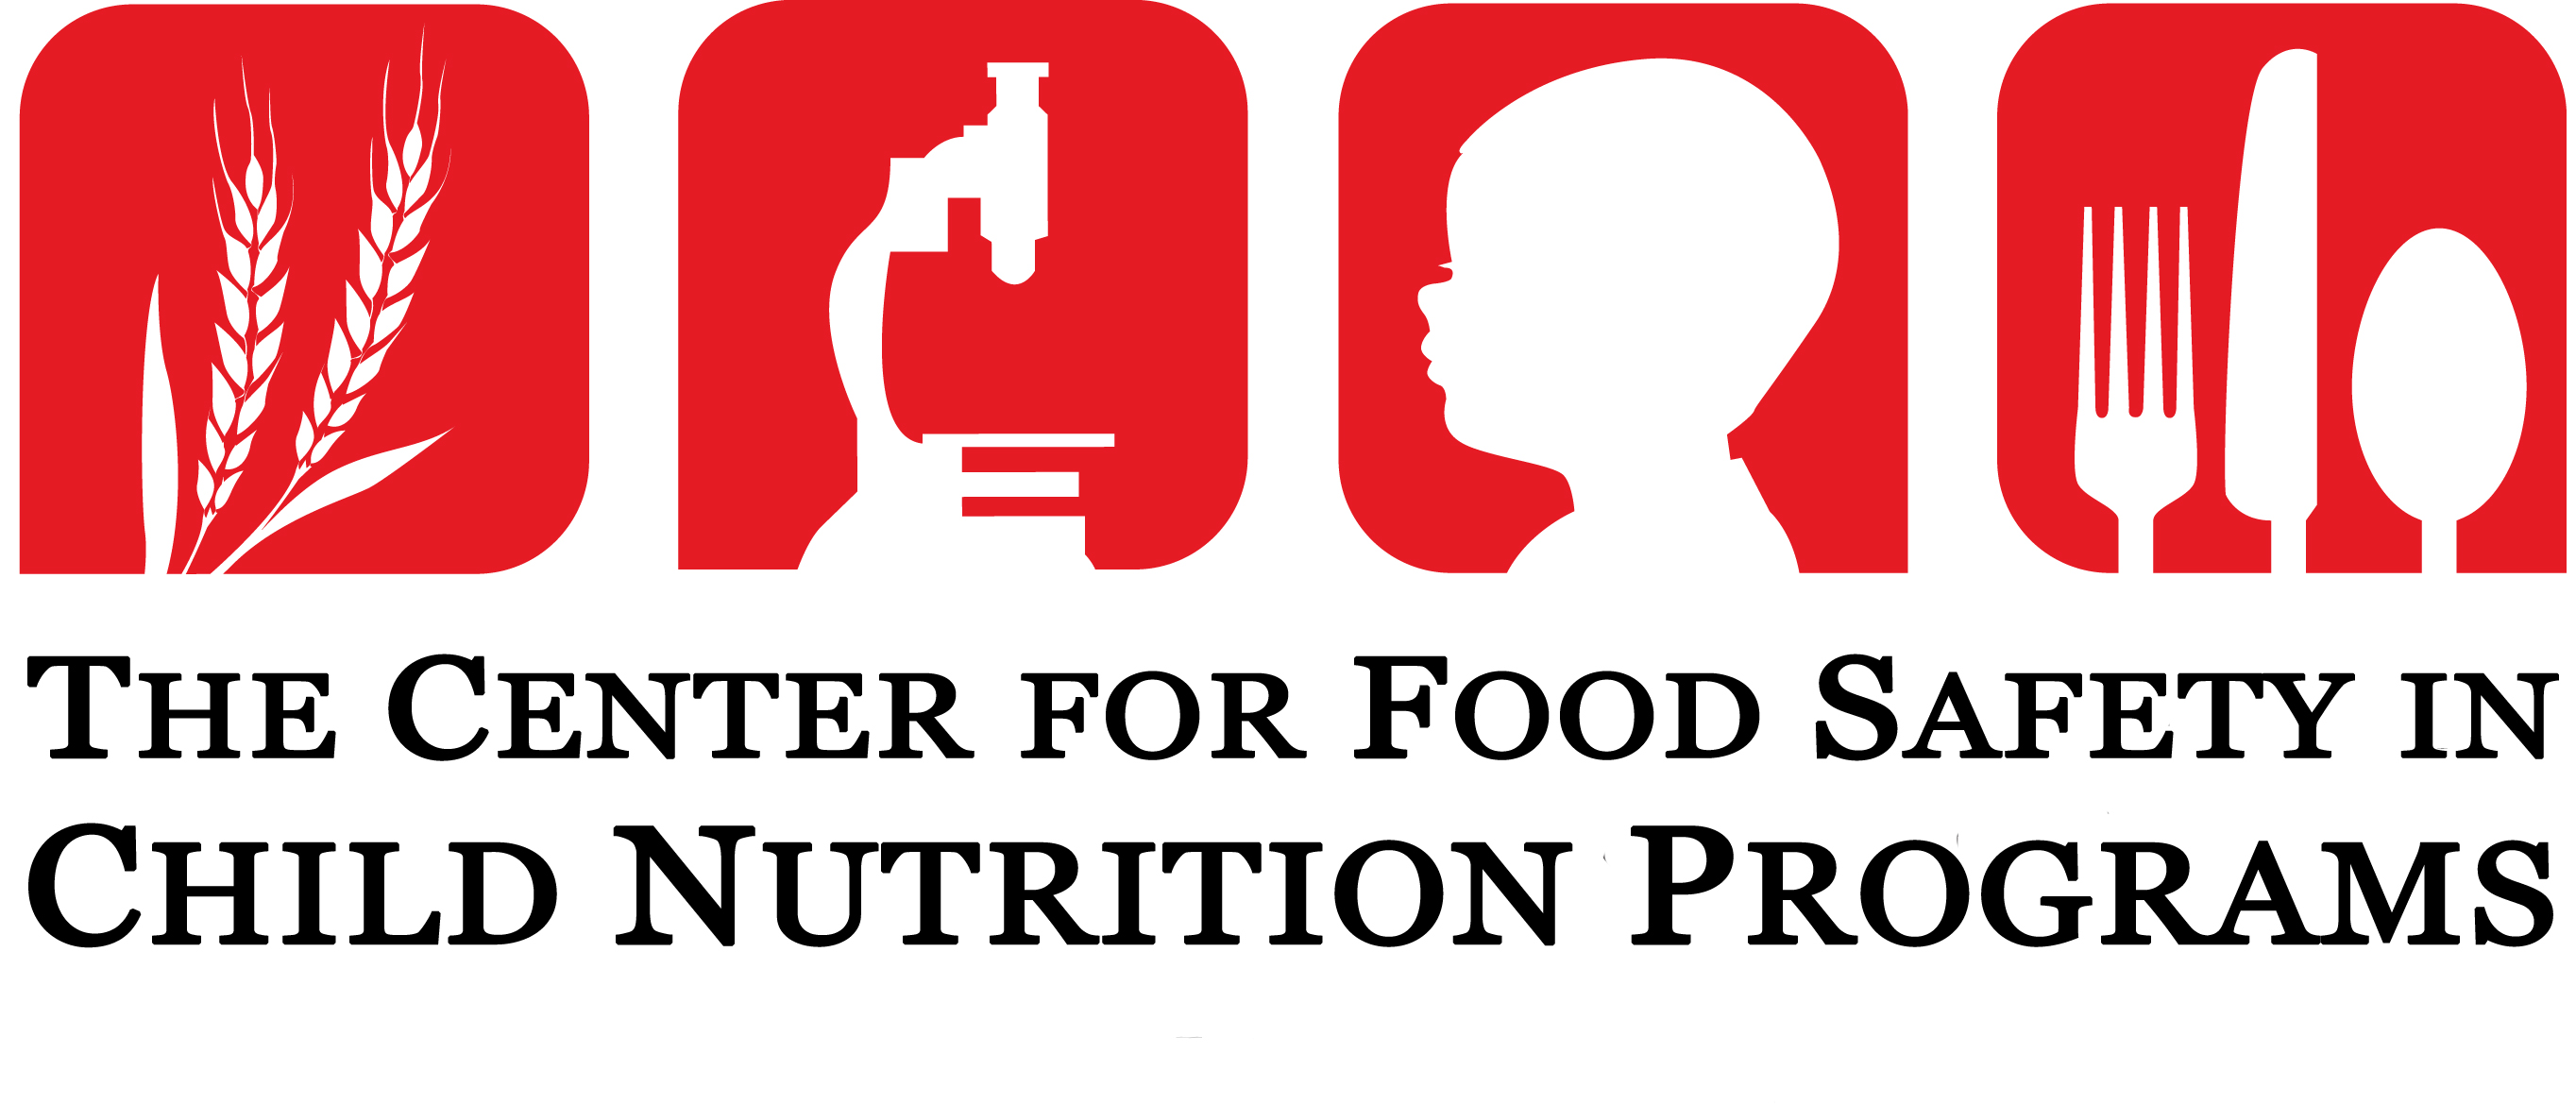 Center for Food Safety in Child Nutrition Programs